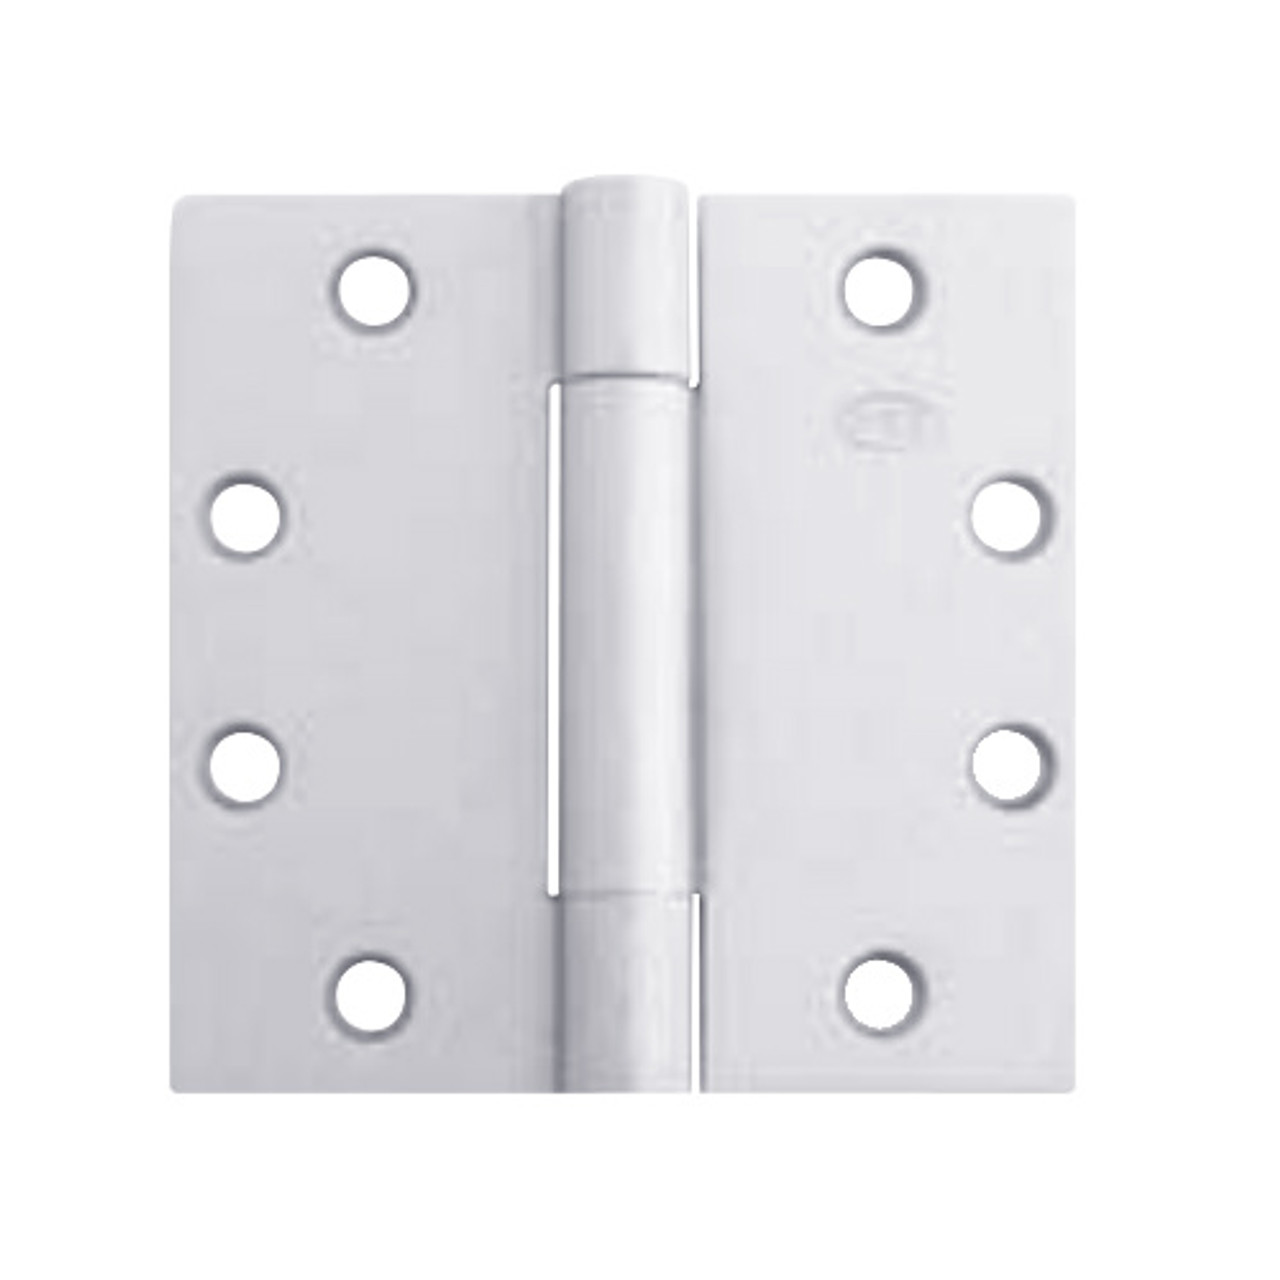 3CB1WT-5x6-651 IVES 3 Knuckle Concealed Bearing Full Mortise Wide Throw Butt Hinge in Bright Chrome Plated